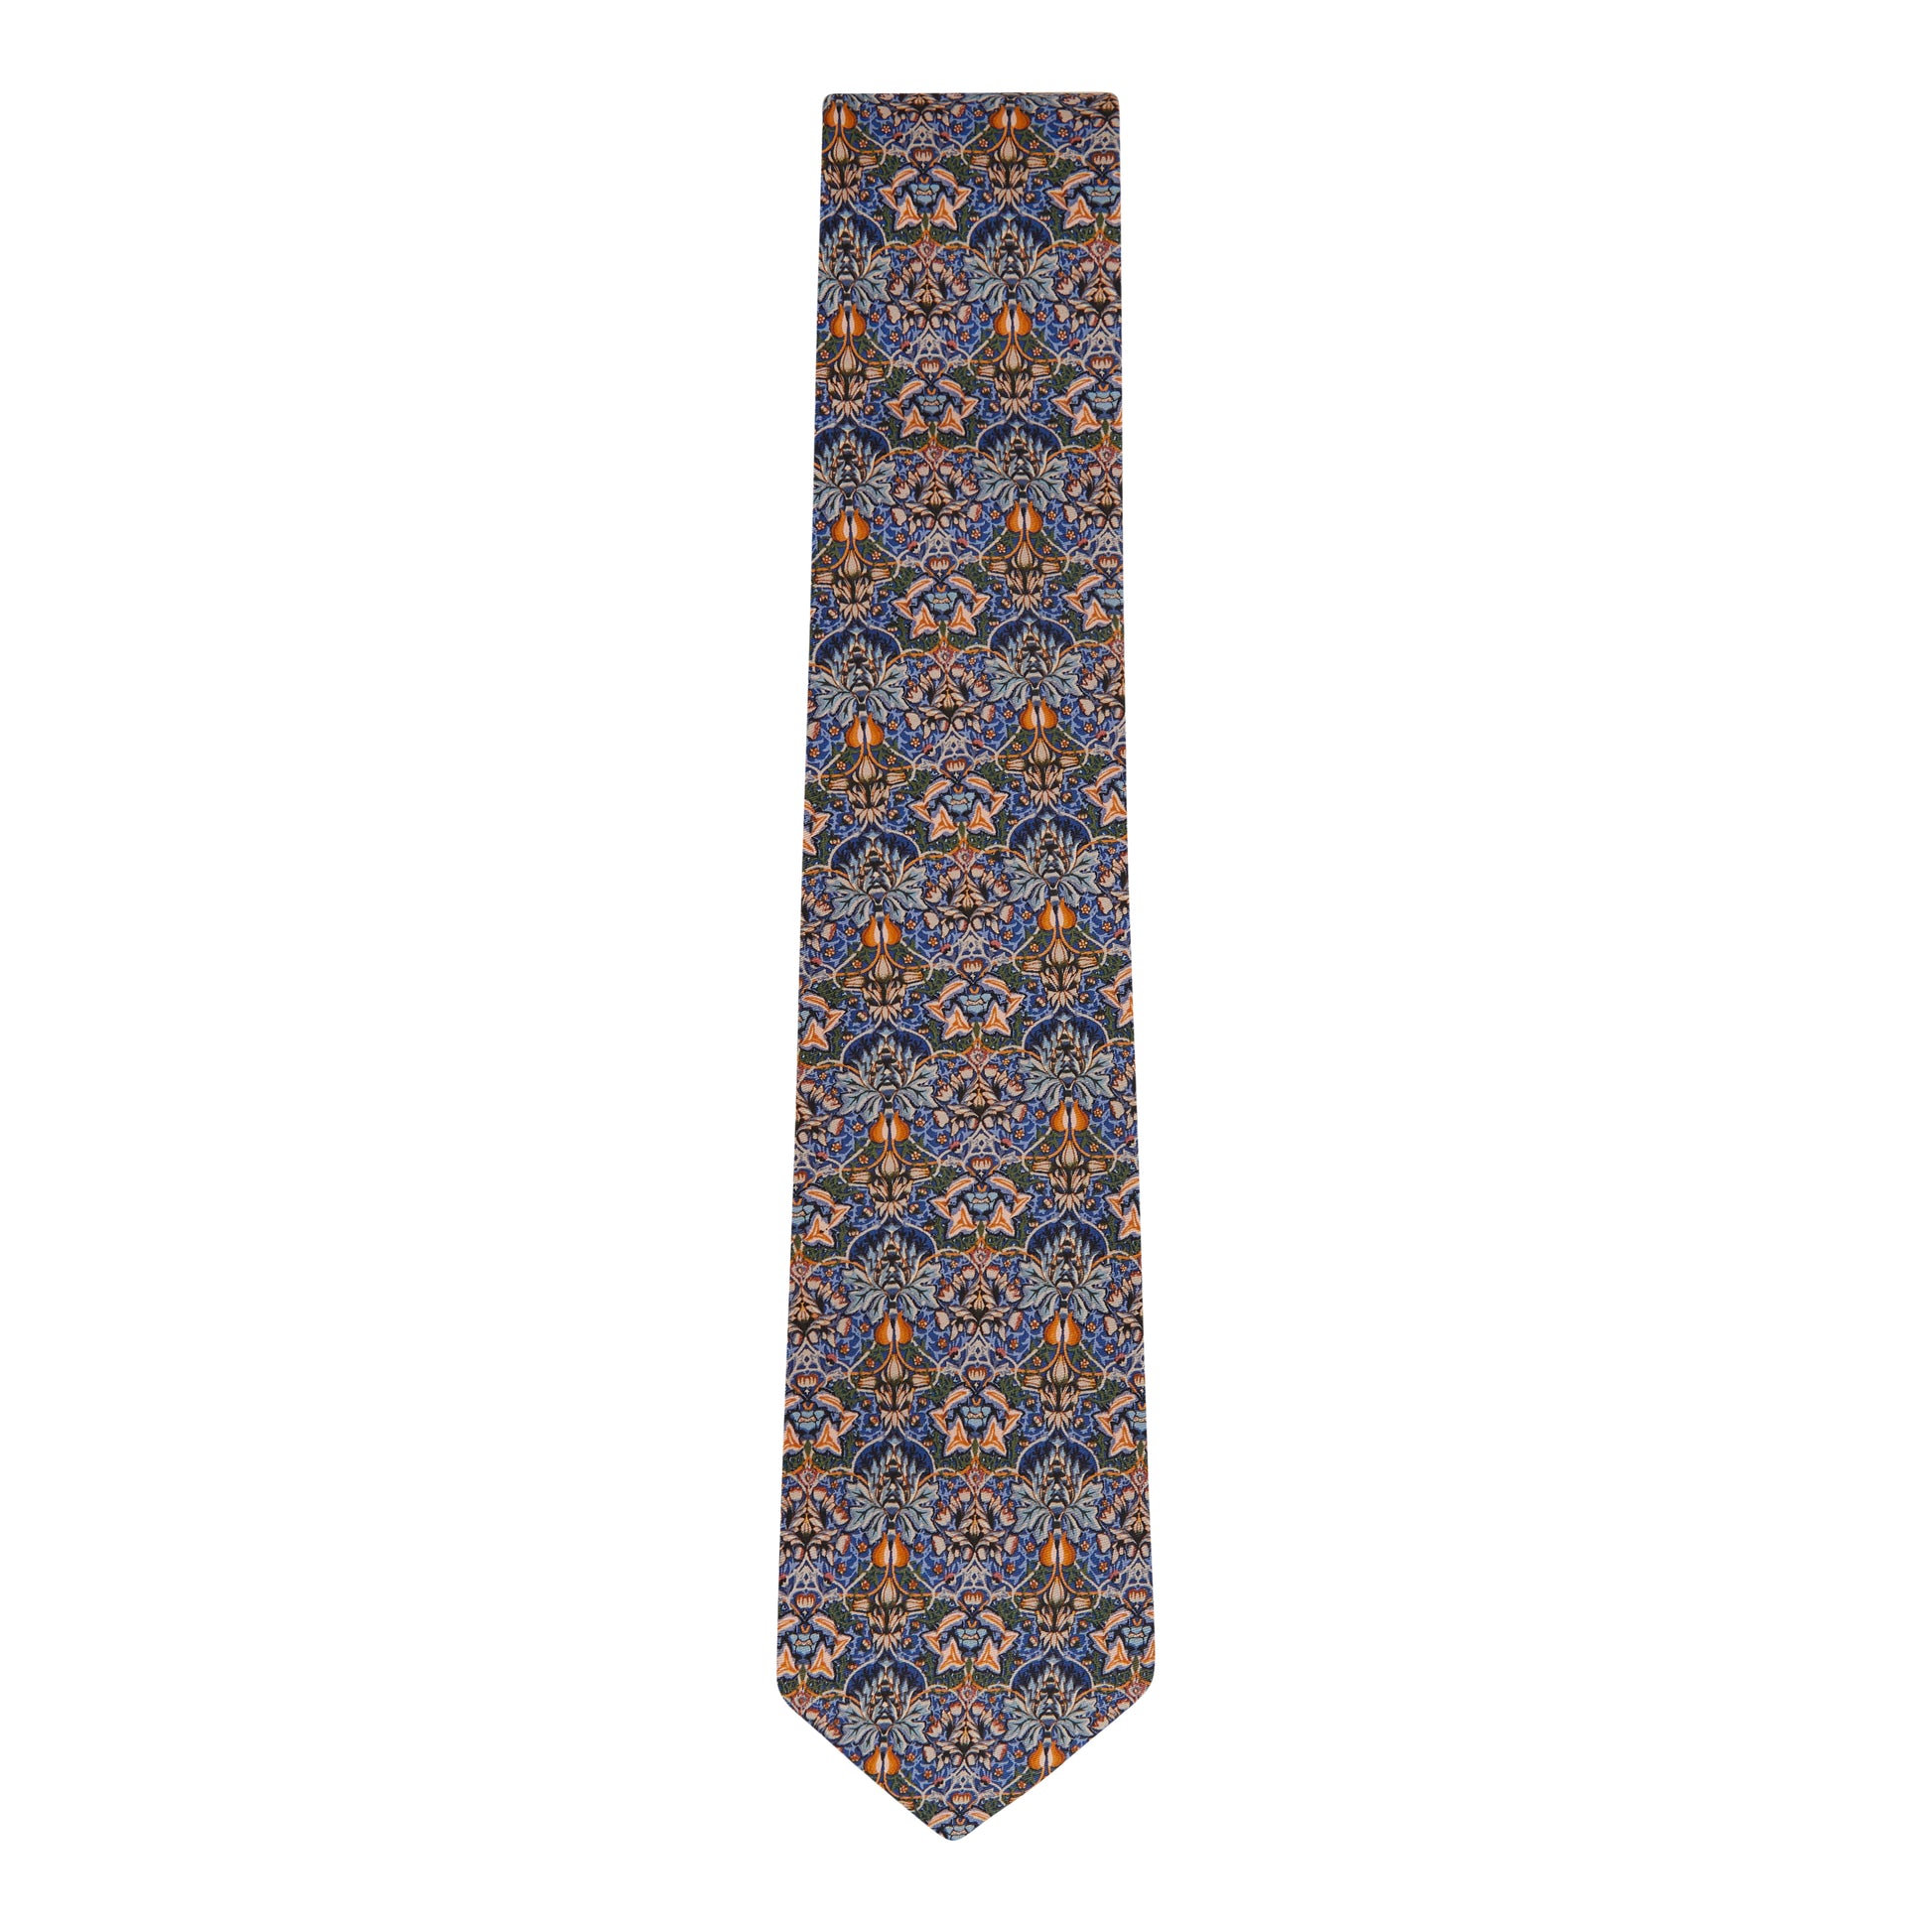 Silk tie with artichoke design by William Morris. From the collection of The Fitzwilliam Museum.